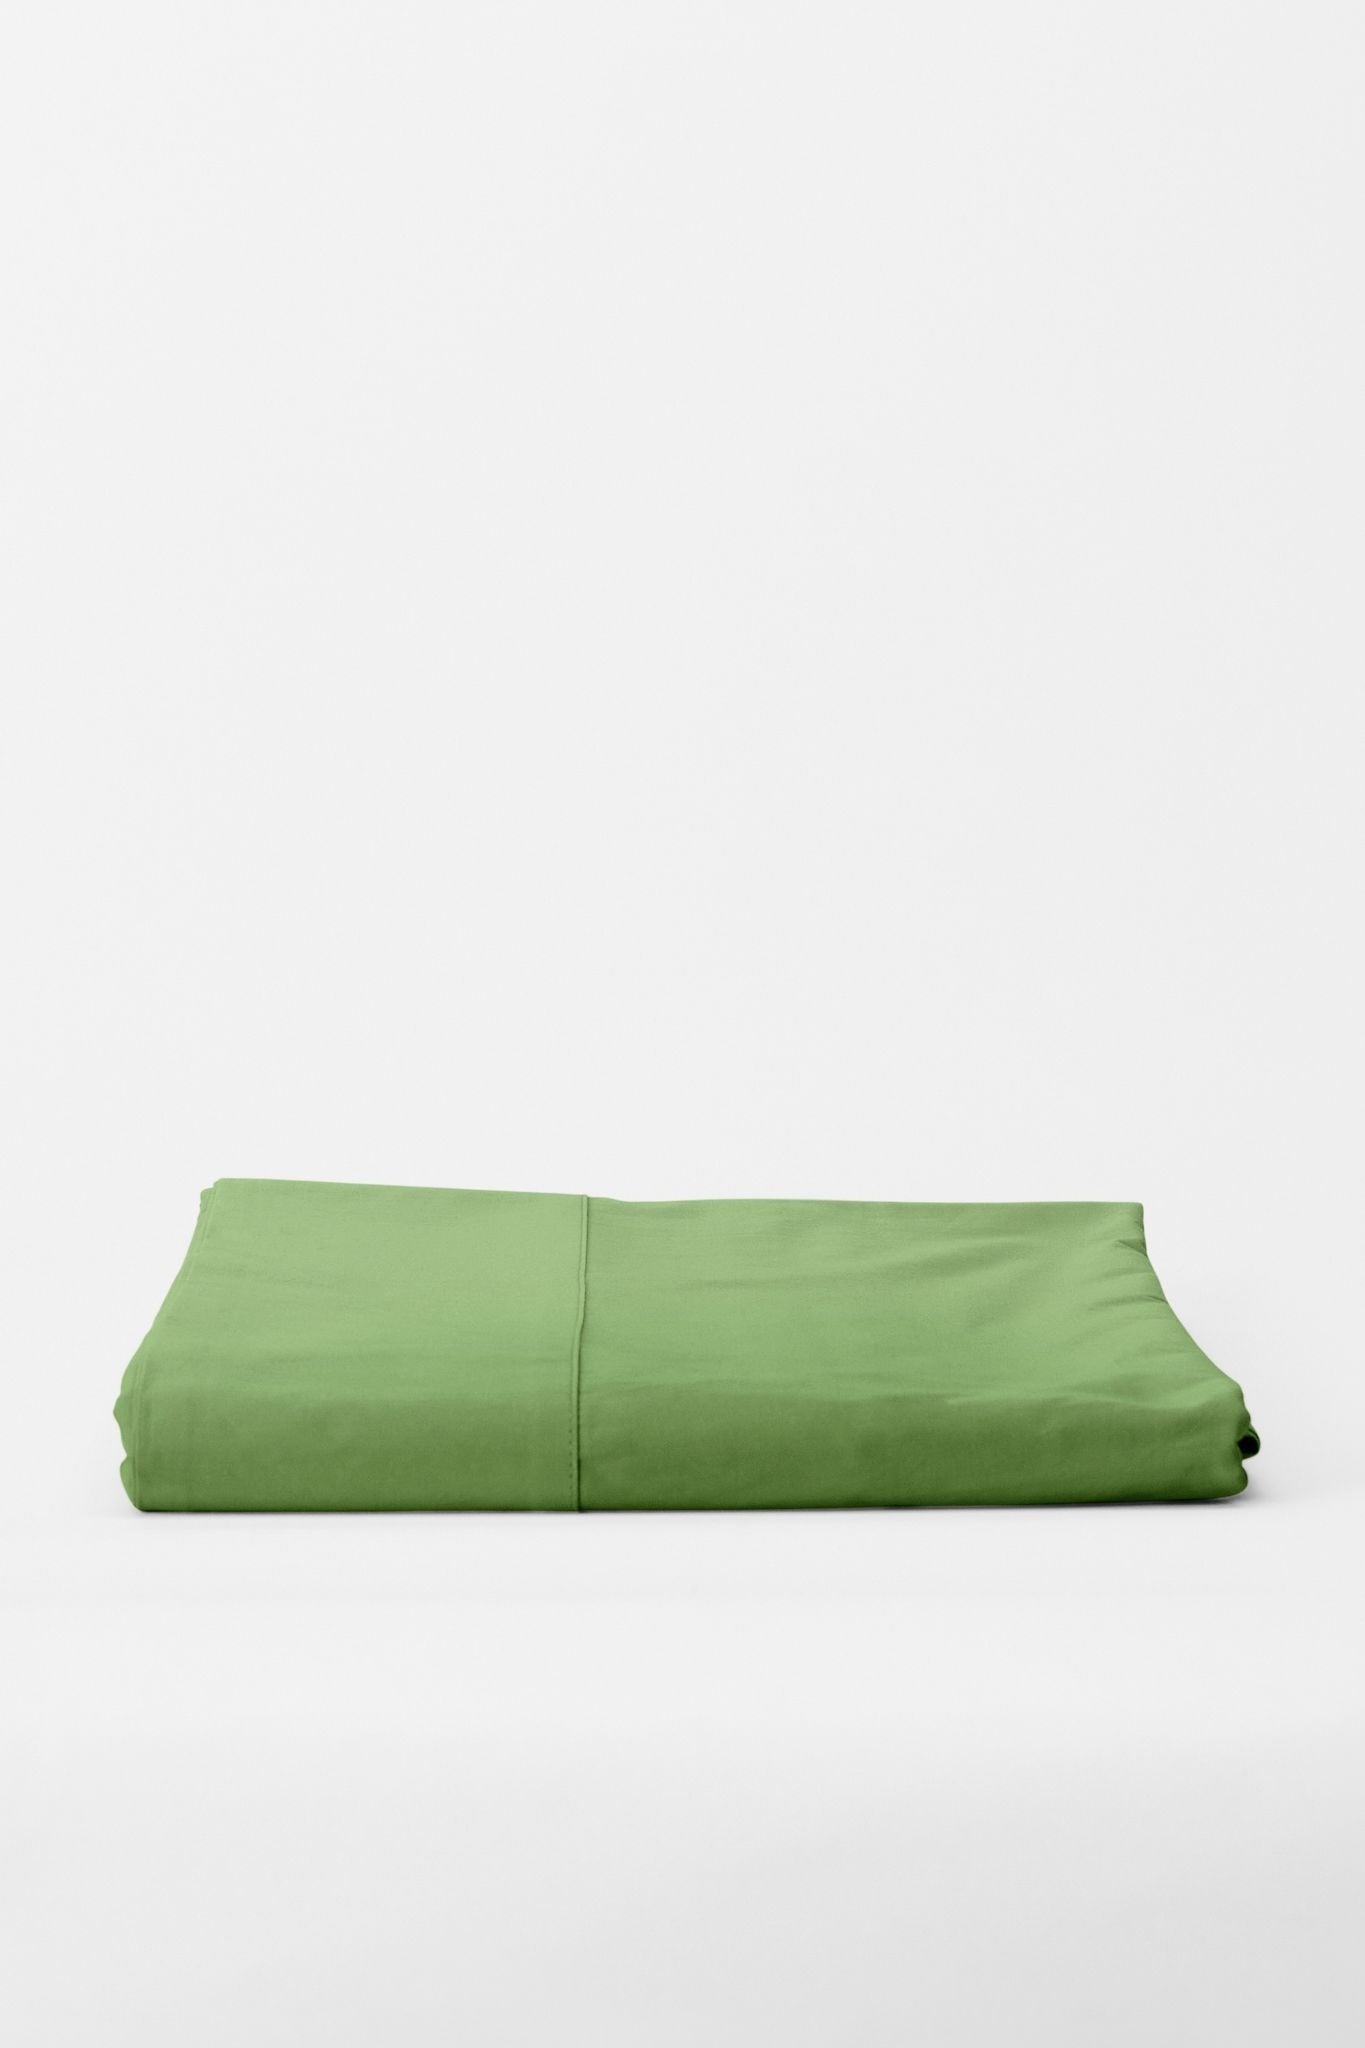 Mono Organic Cotton Percale Flat Sheet Bed Sheets in Apple